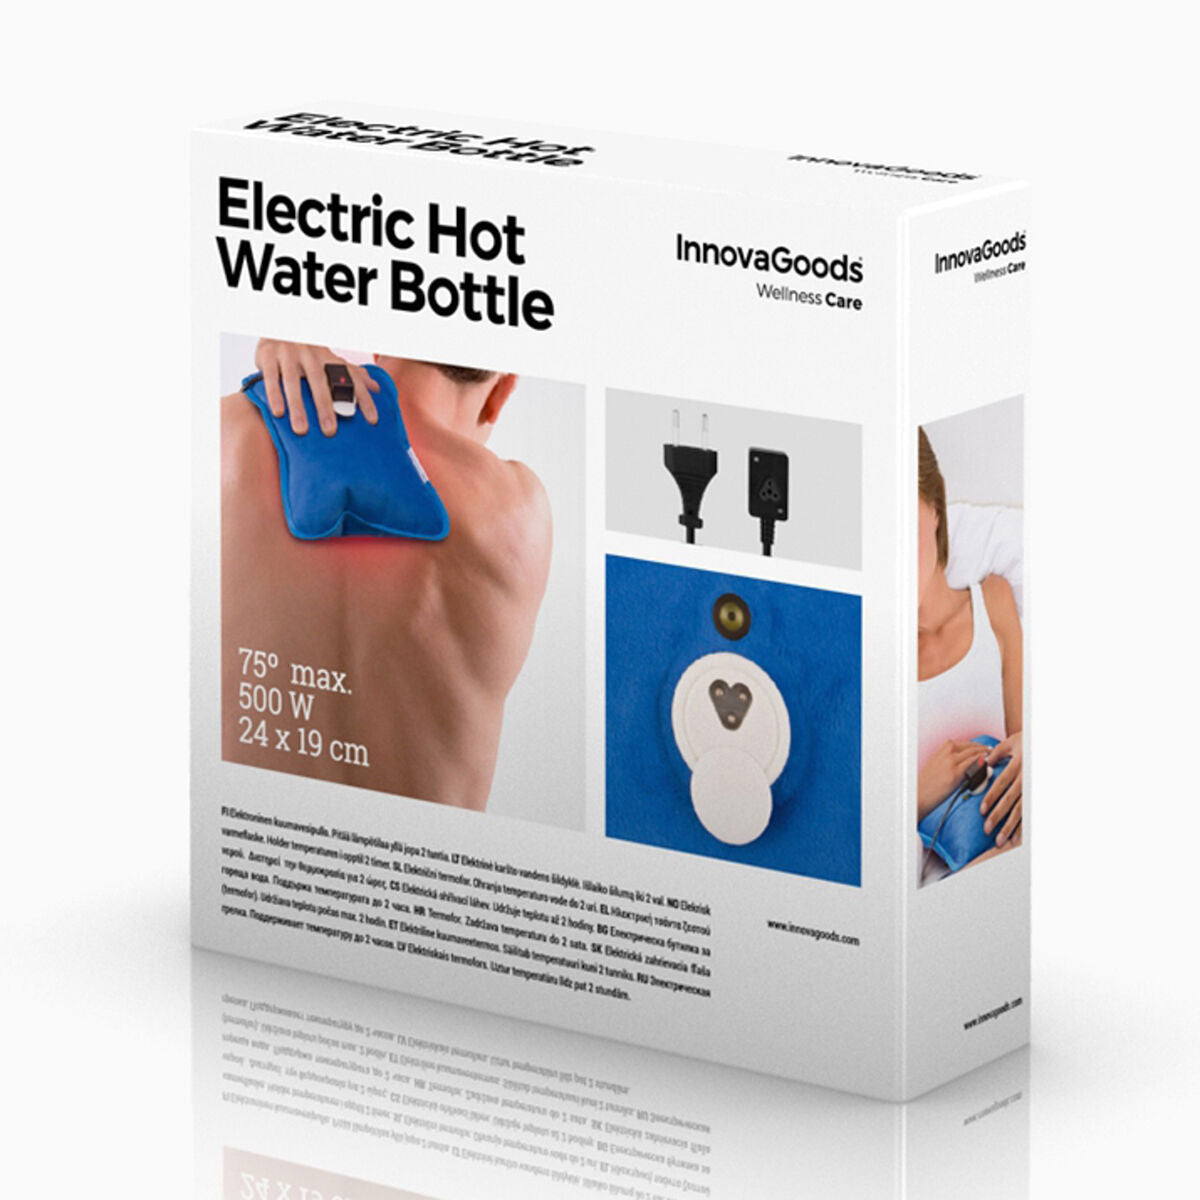 InnovaGoods Electric Hot Water Bottle